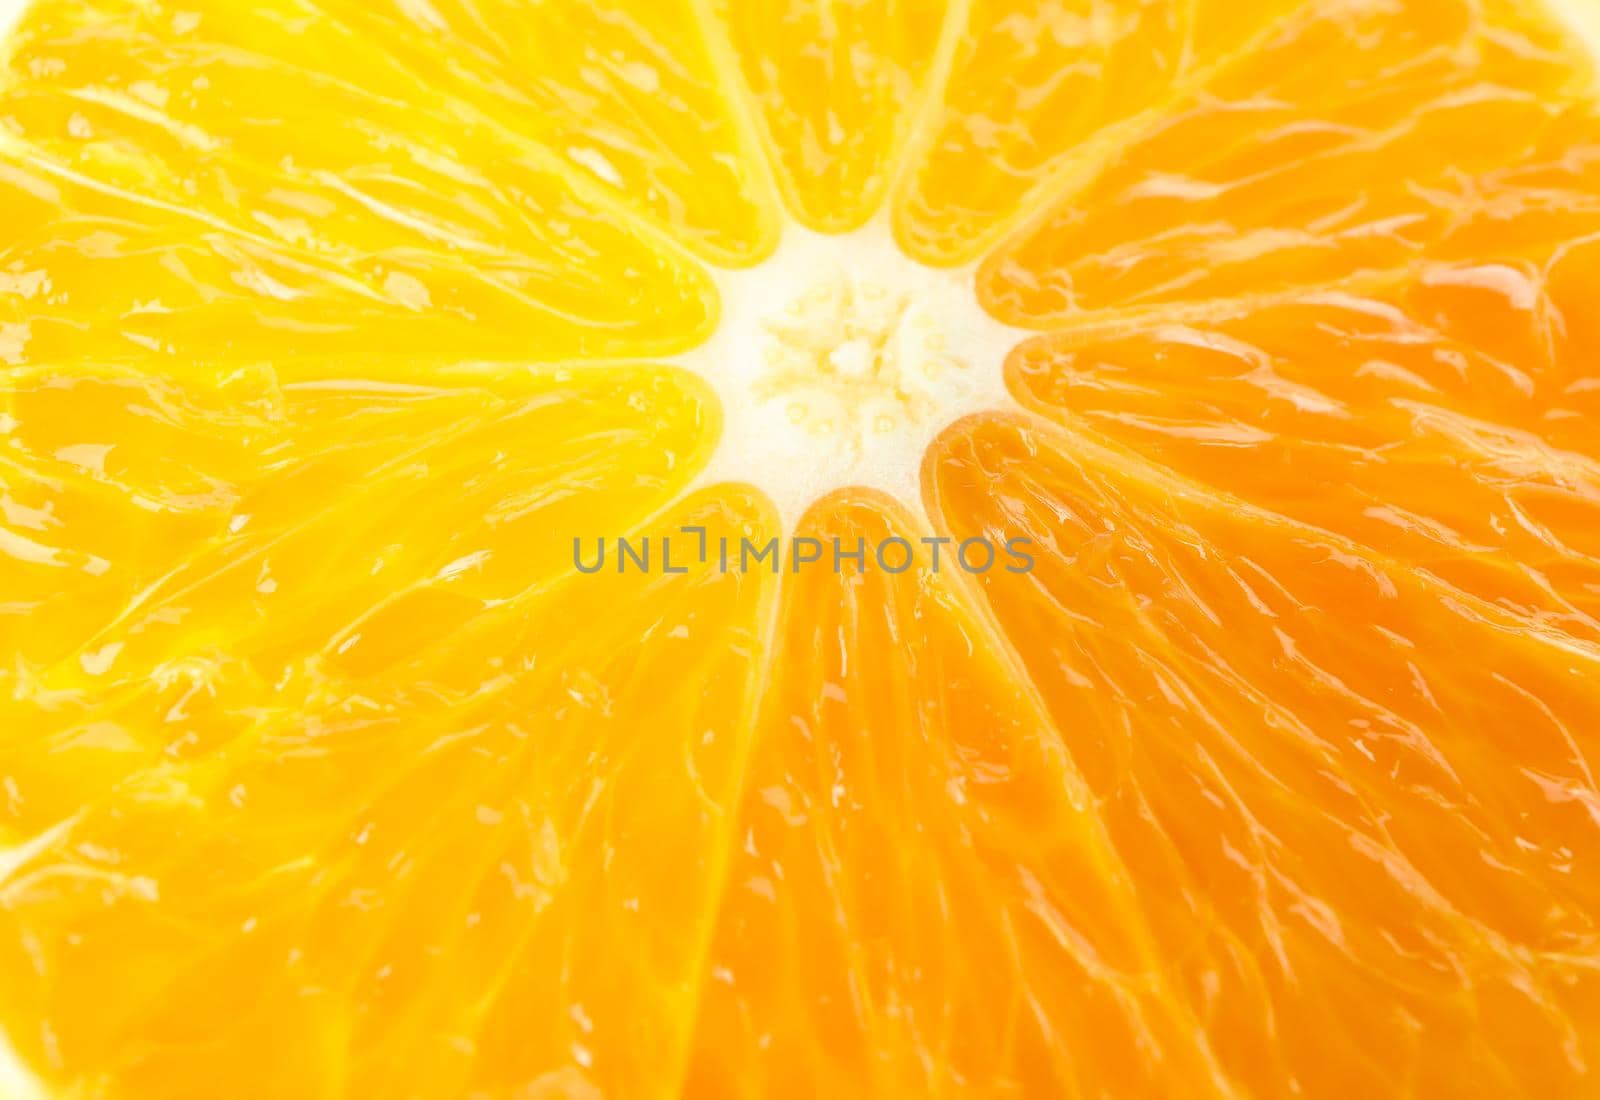 Fresh slice orange as background, space for text and closeup. Fresh citrus fruit by AtlasCompany